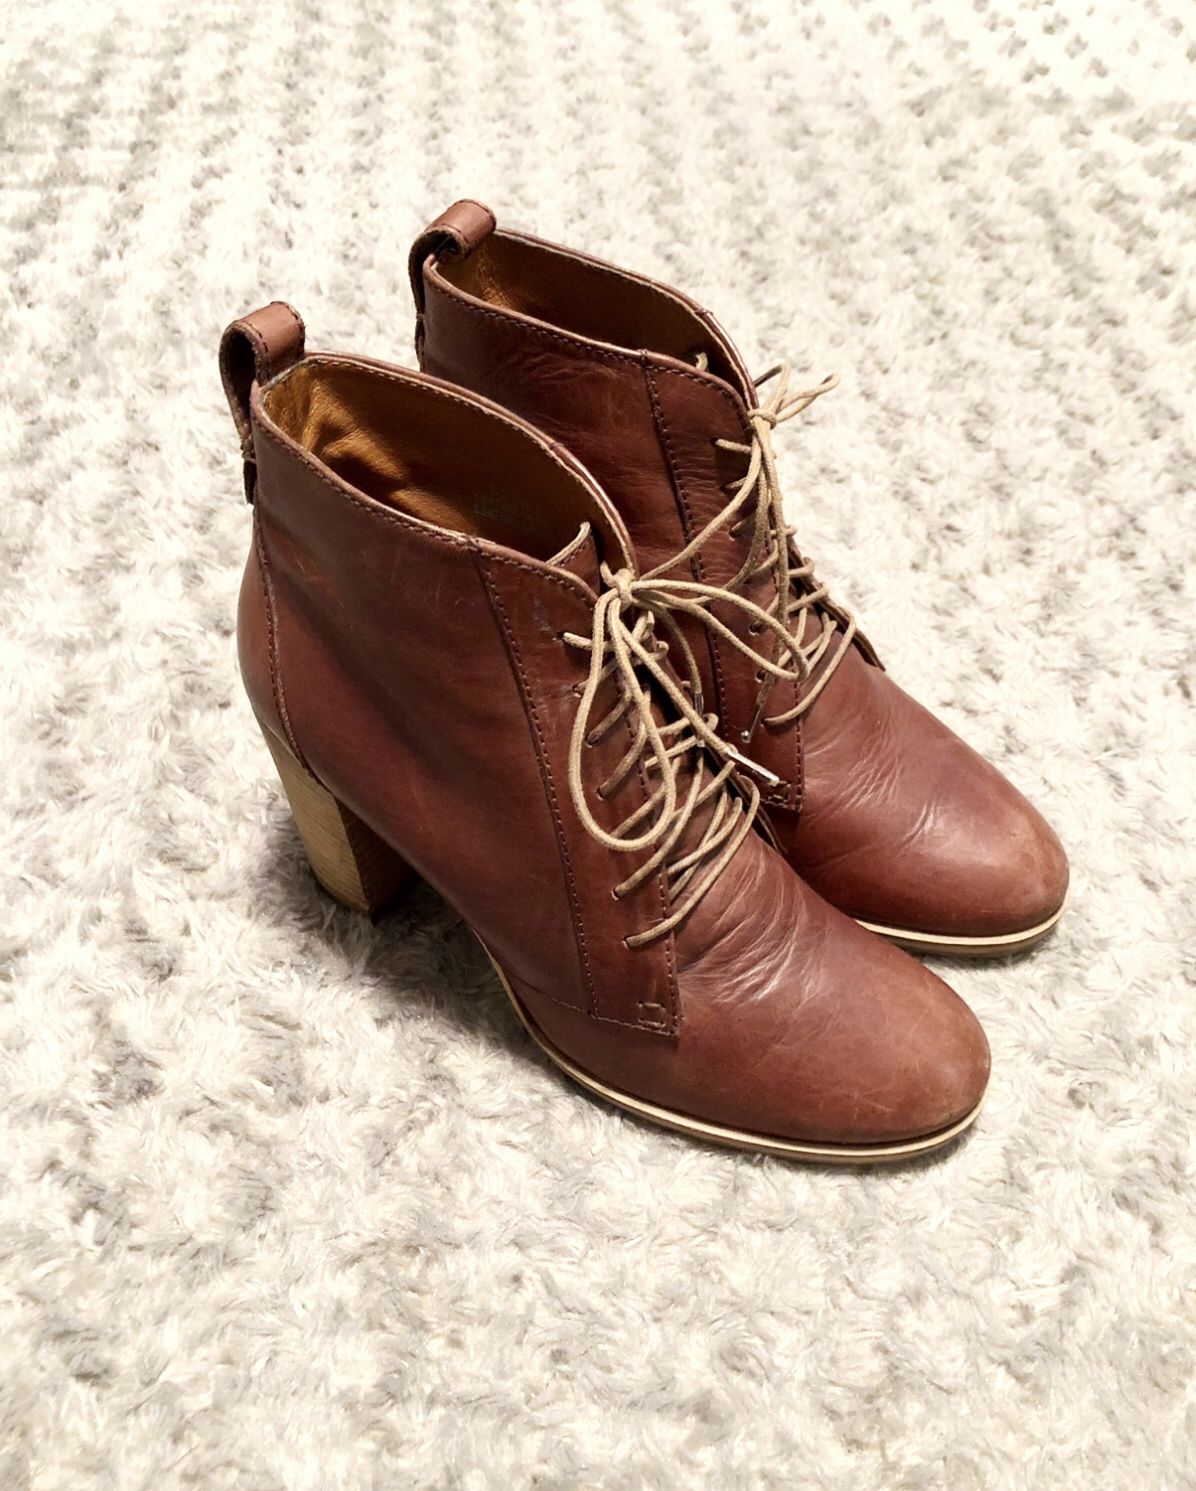 Madewell 1937 boots paid $198 size 7 good condition